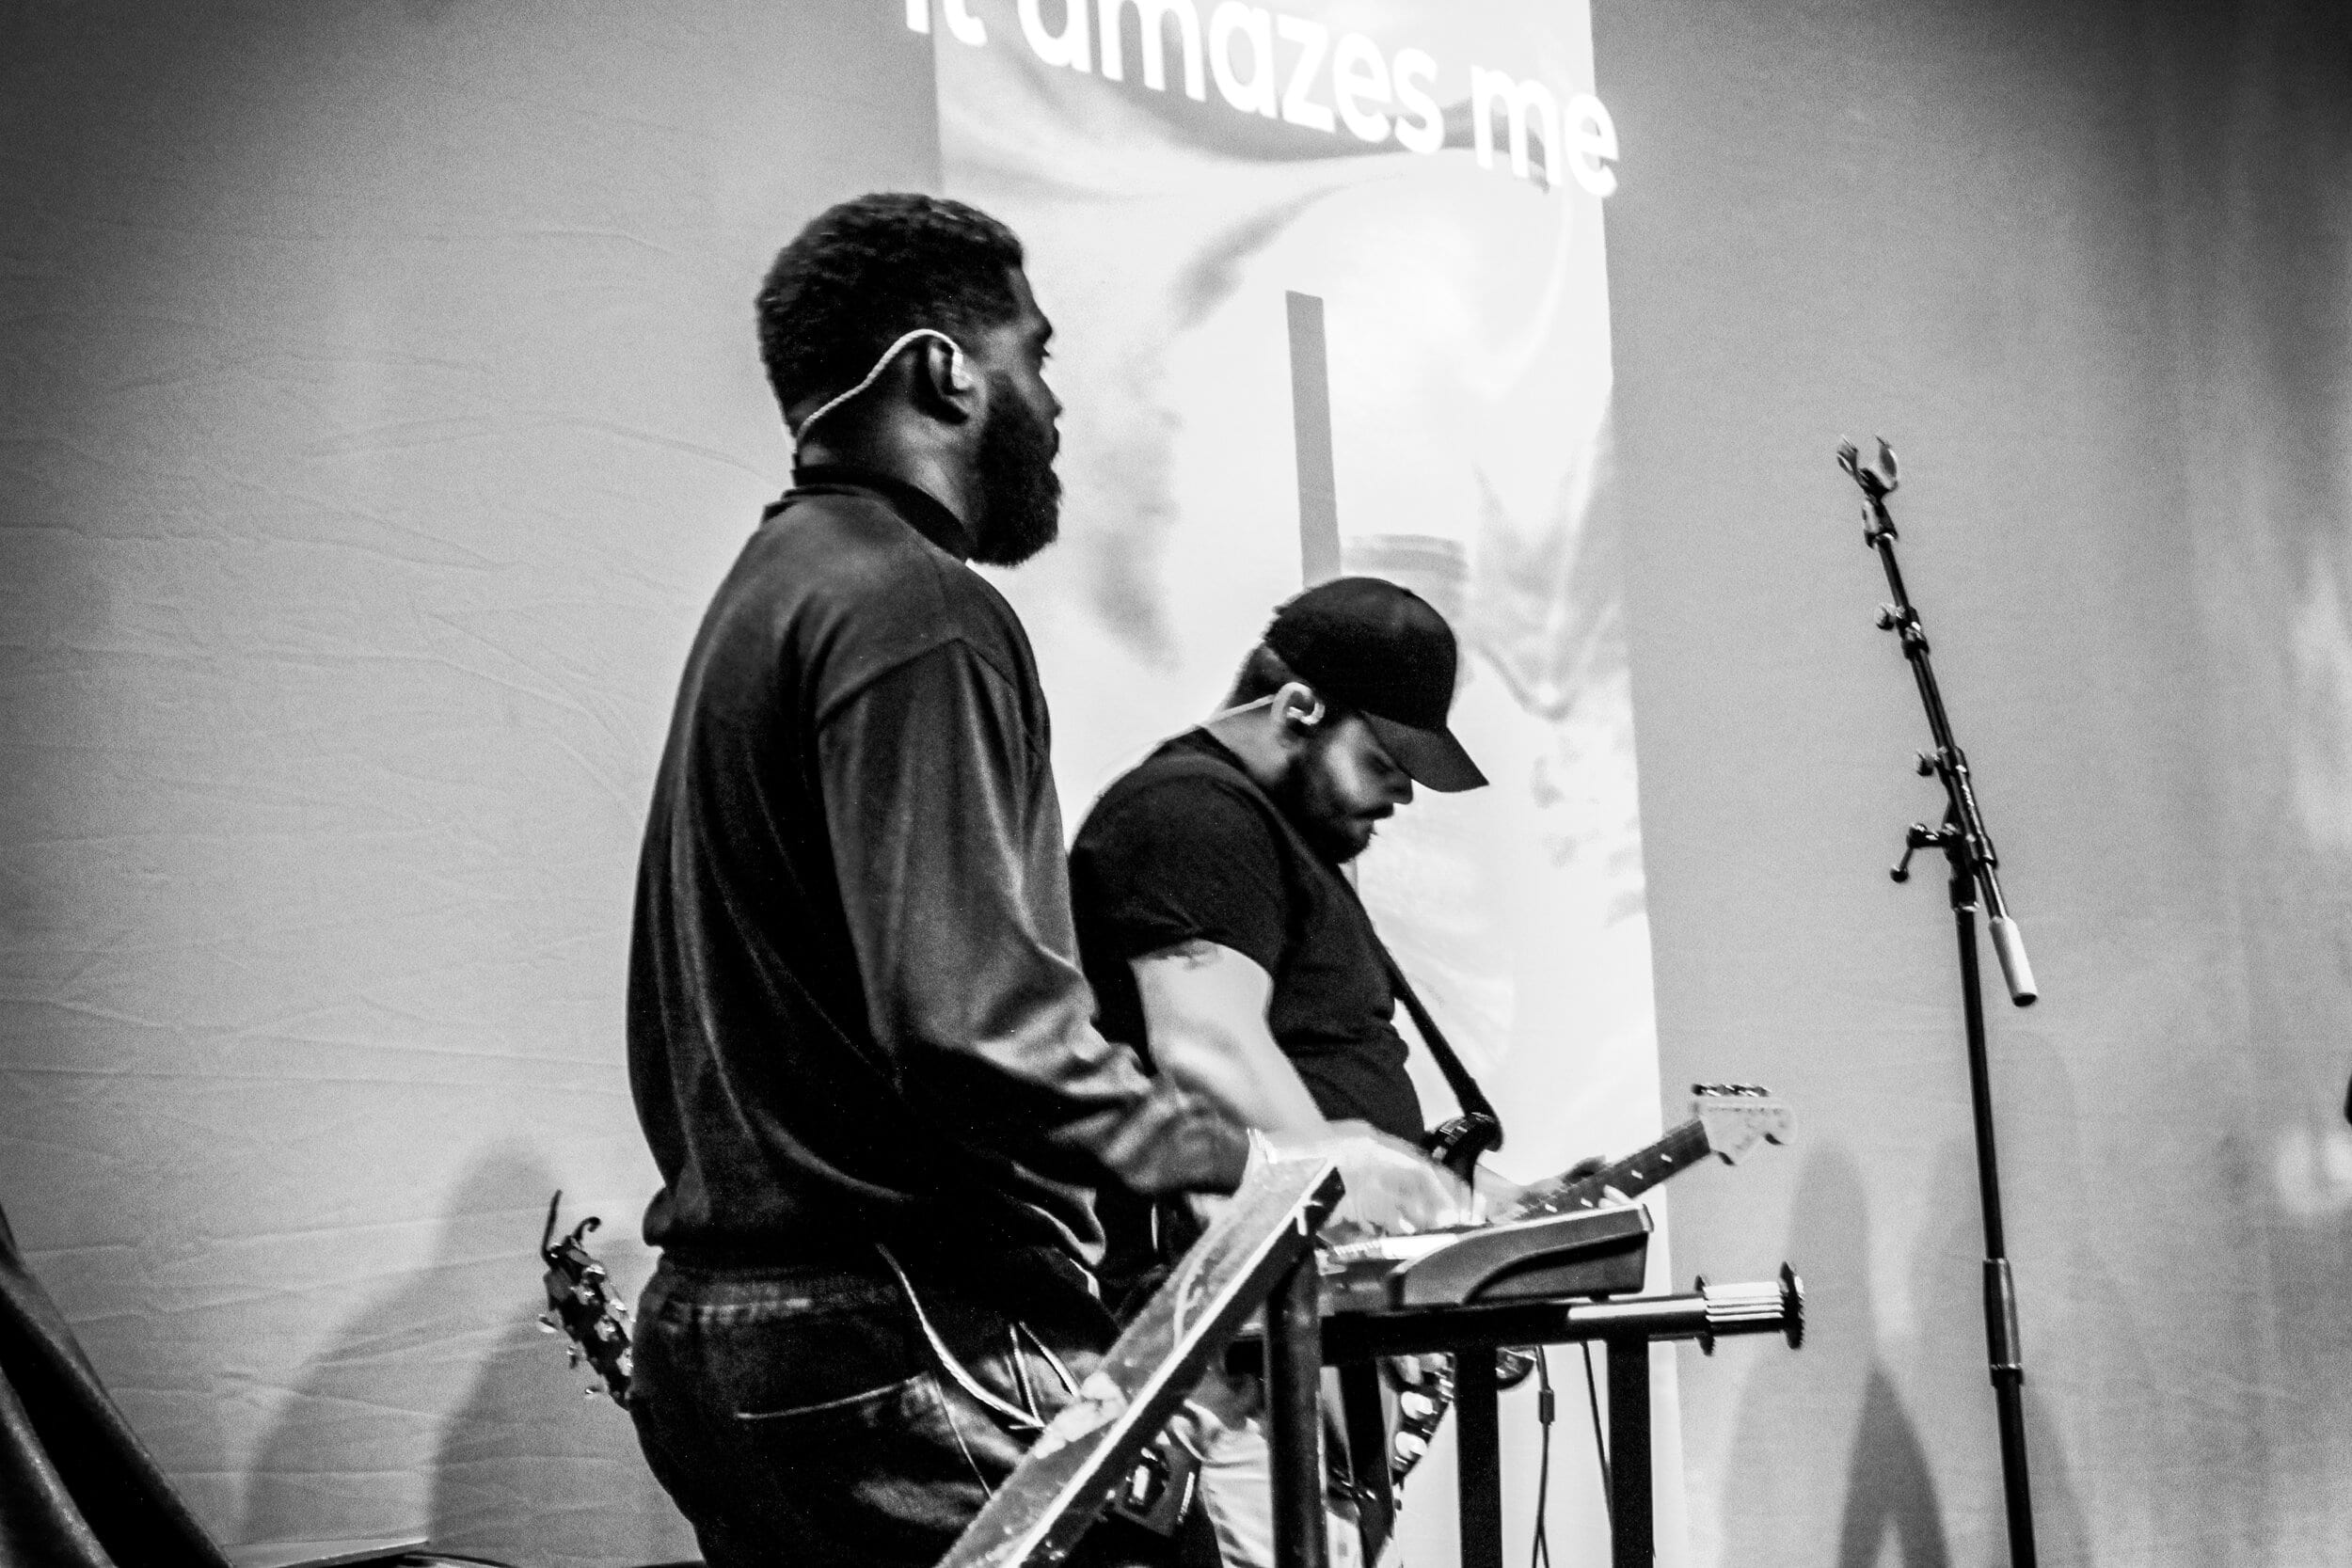 Pianist and guitar player at Converge.